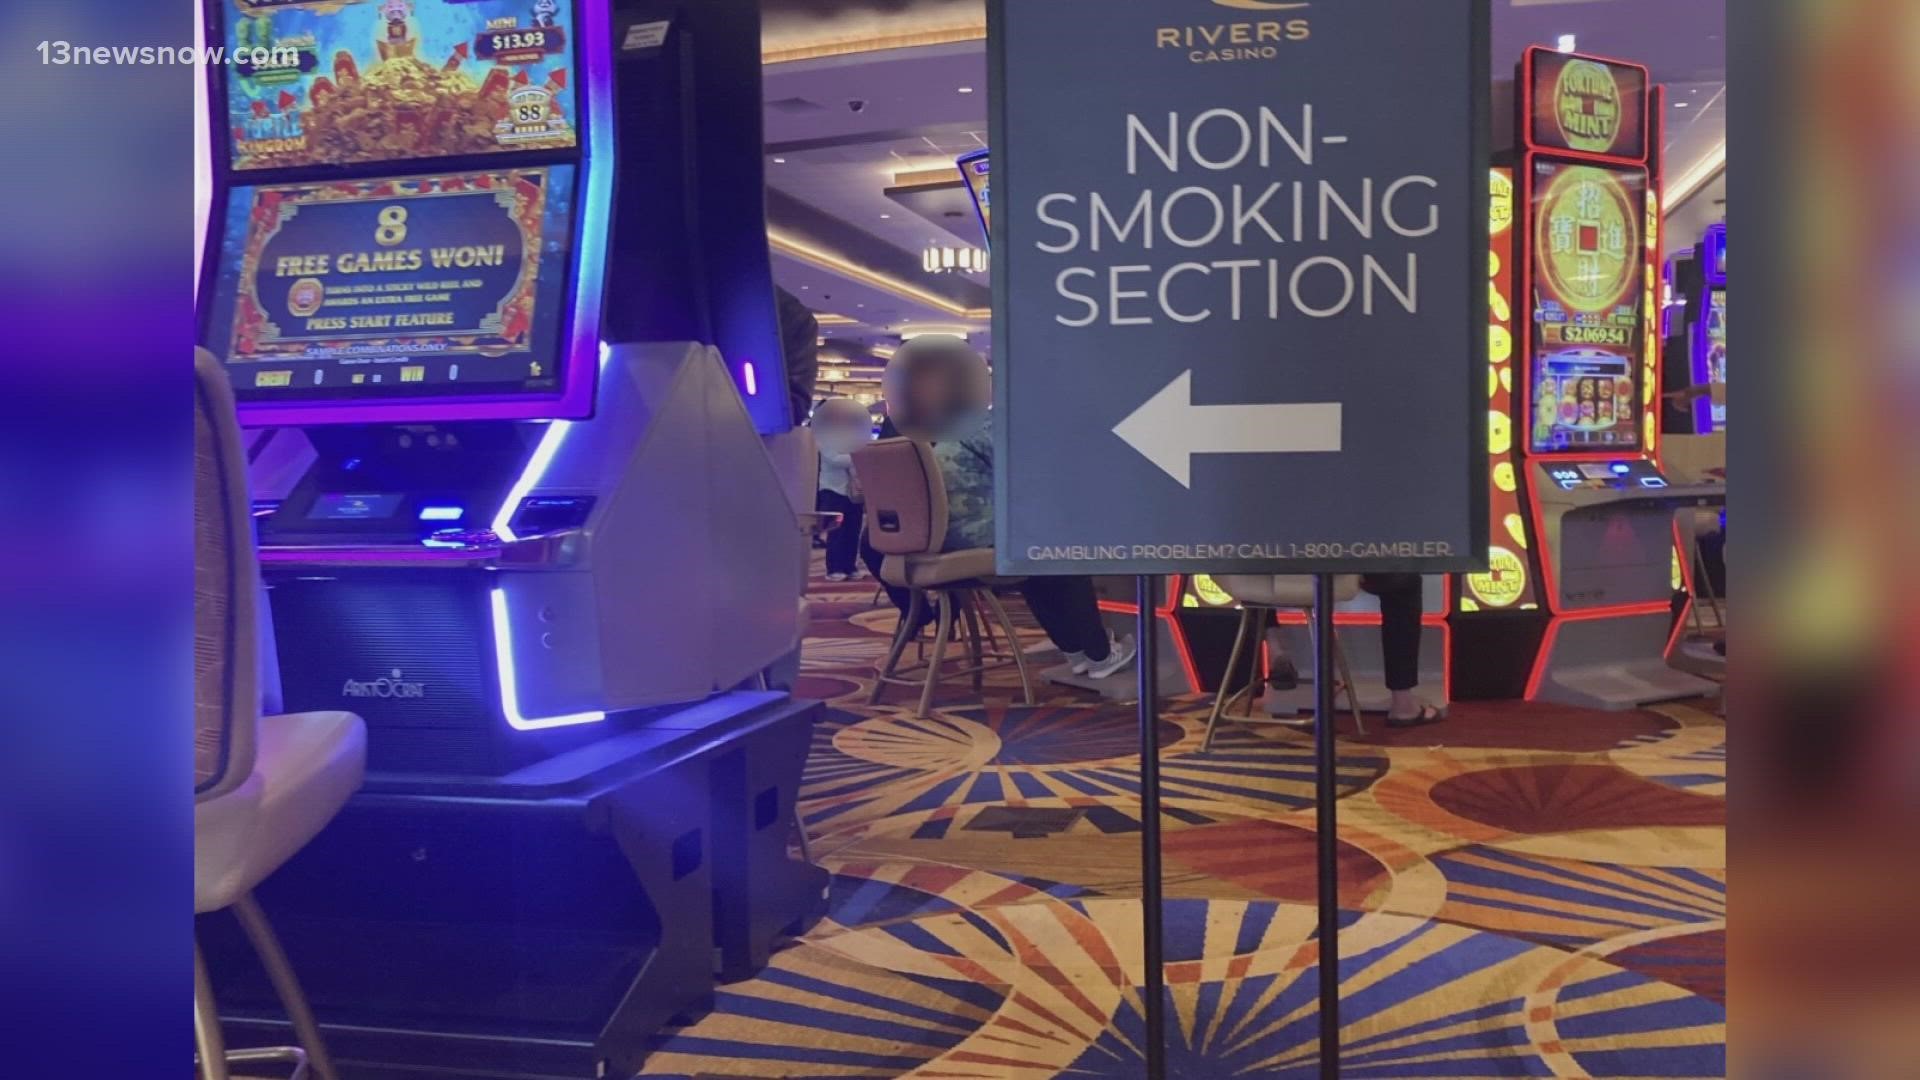 No smoking signs are going up in parts of Rivers Casino Portsmouth. Several people have complained about the smell of smoke since the casino opened.